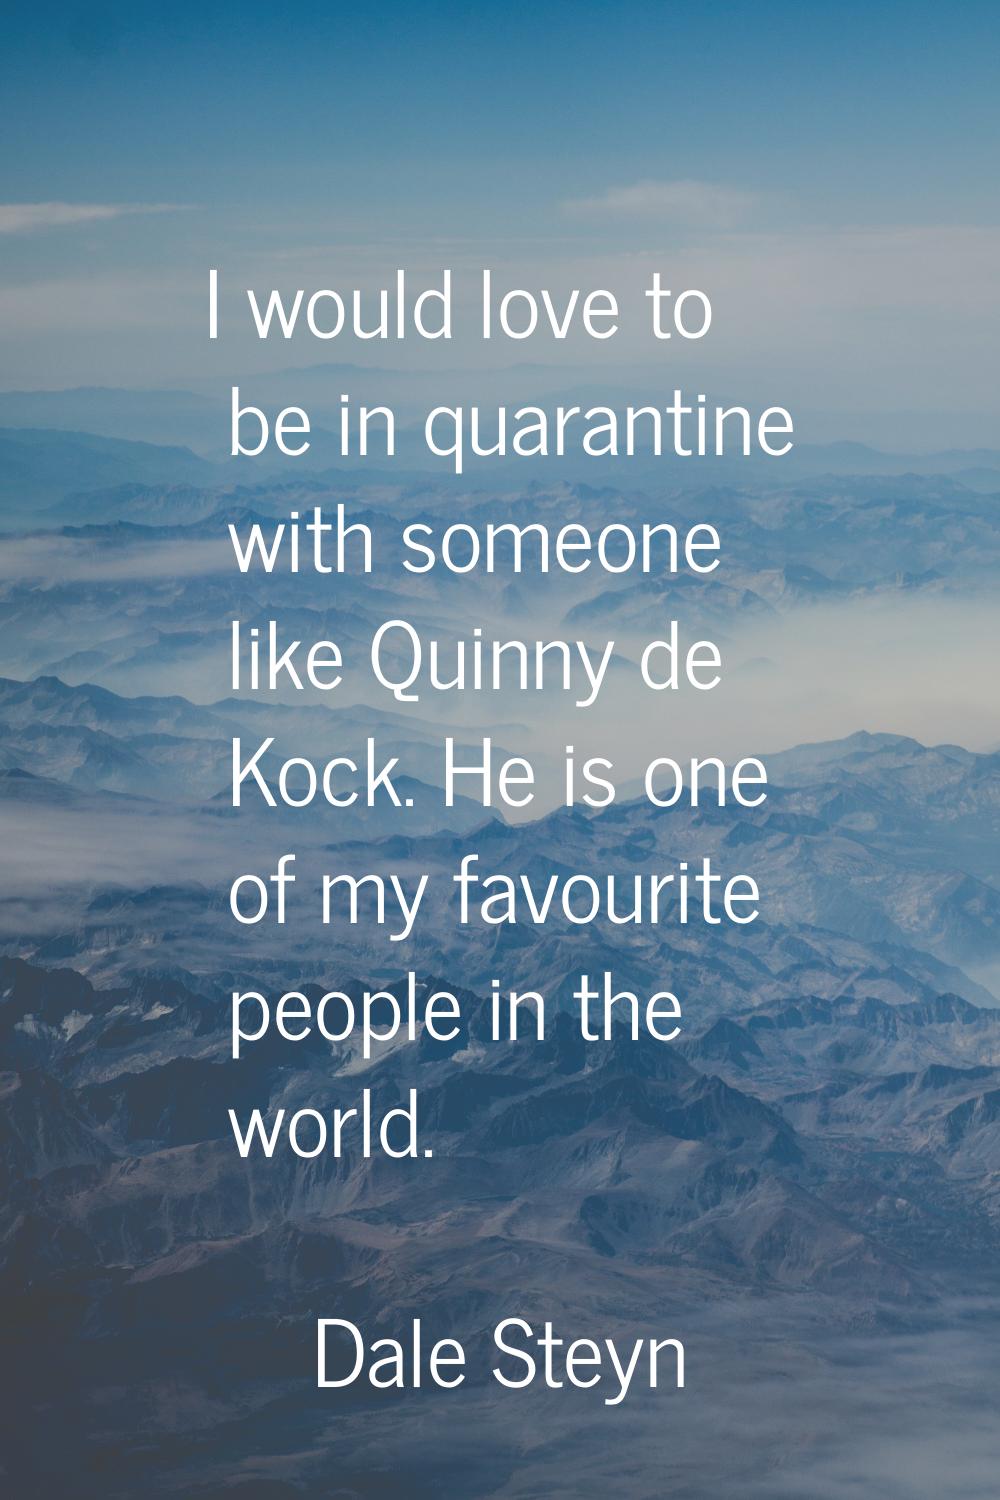 I would love to be in quarantine with someone like Quinny de Kock. He is one of my favourite people